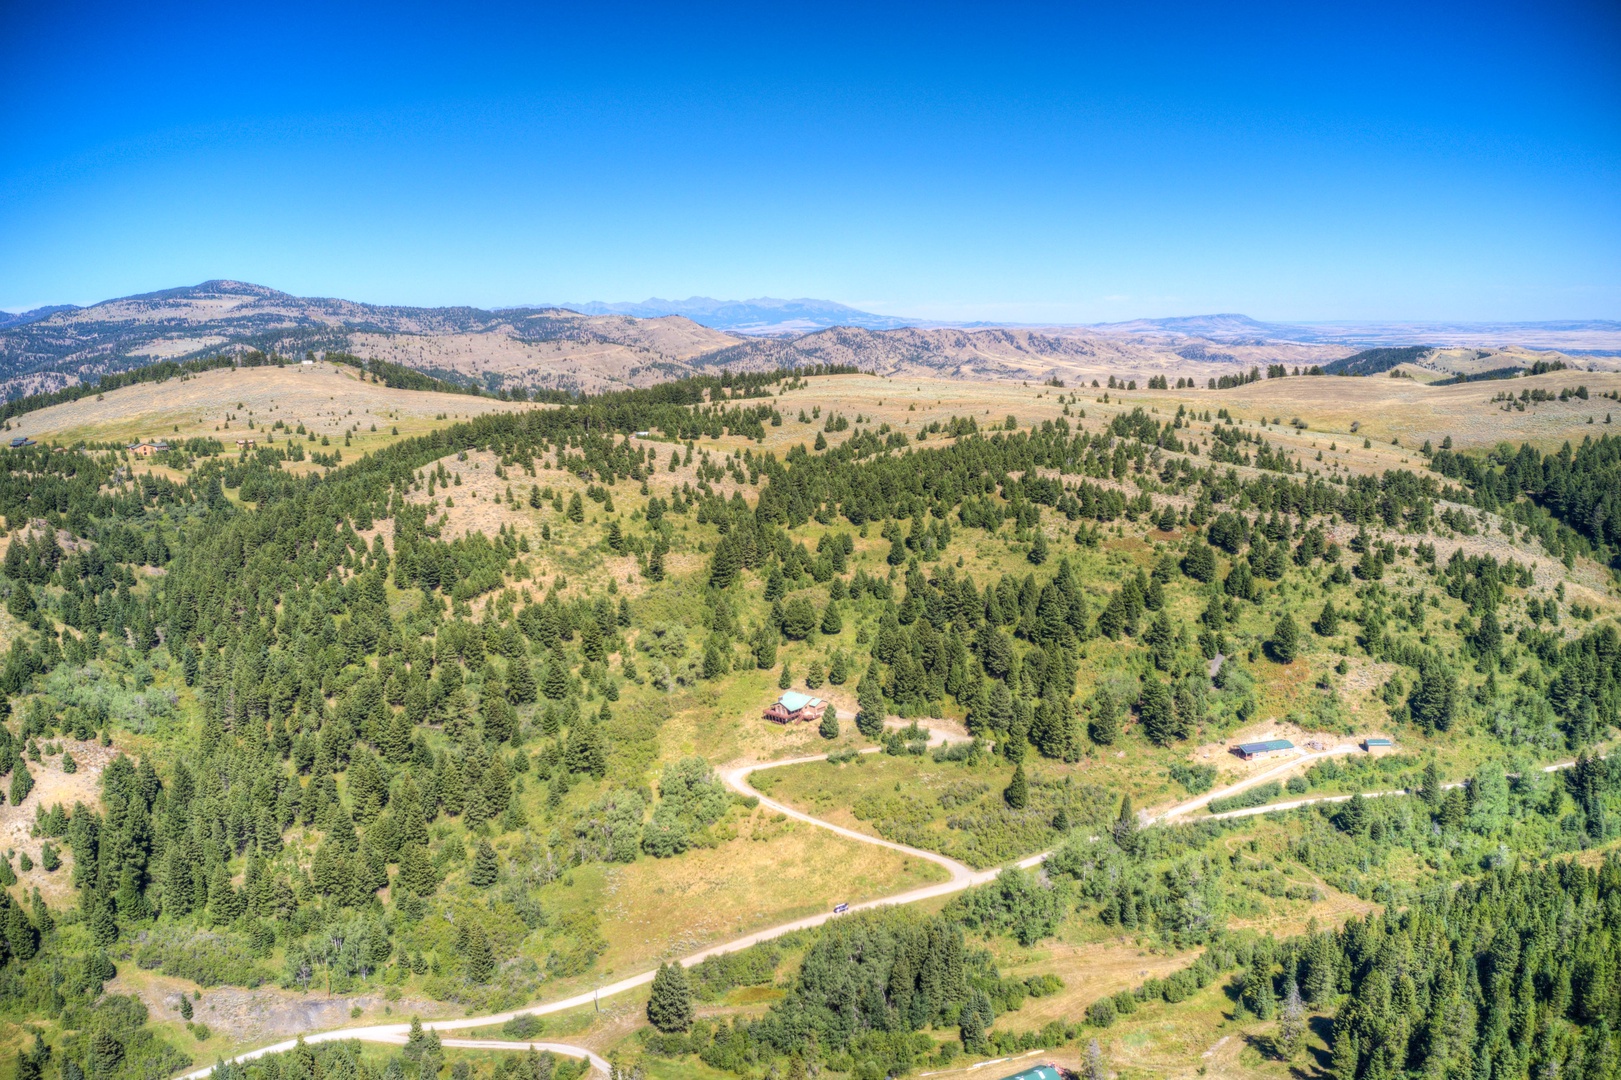 Bozeman Vacation Rentals, The Canyon Lookout - Arial view of the valley